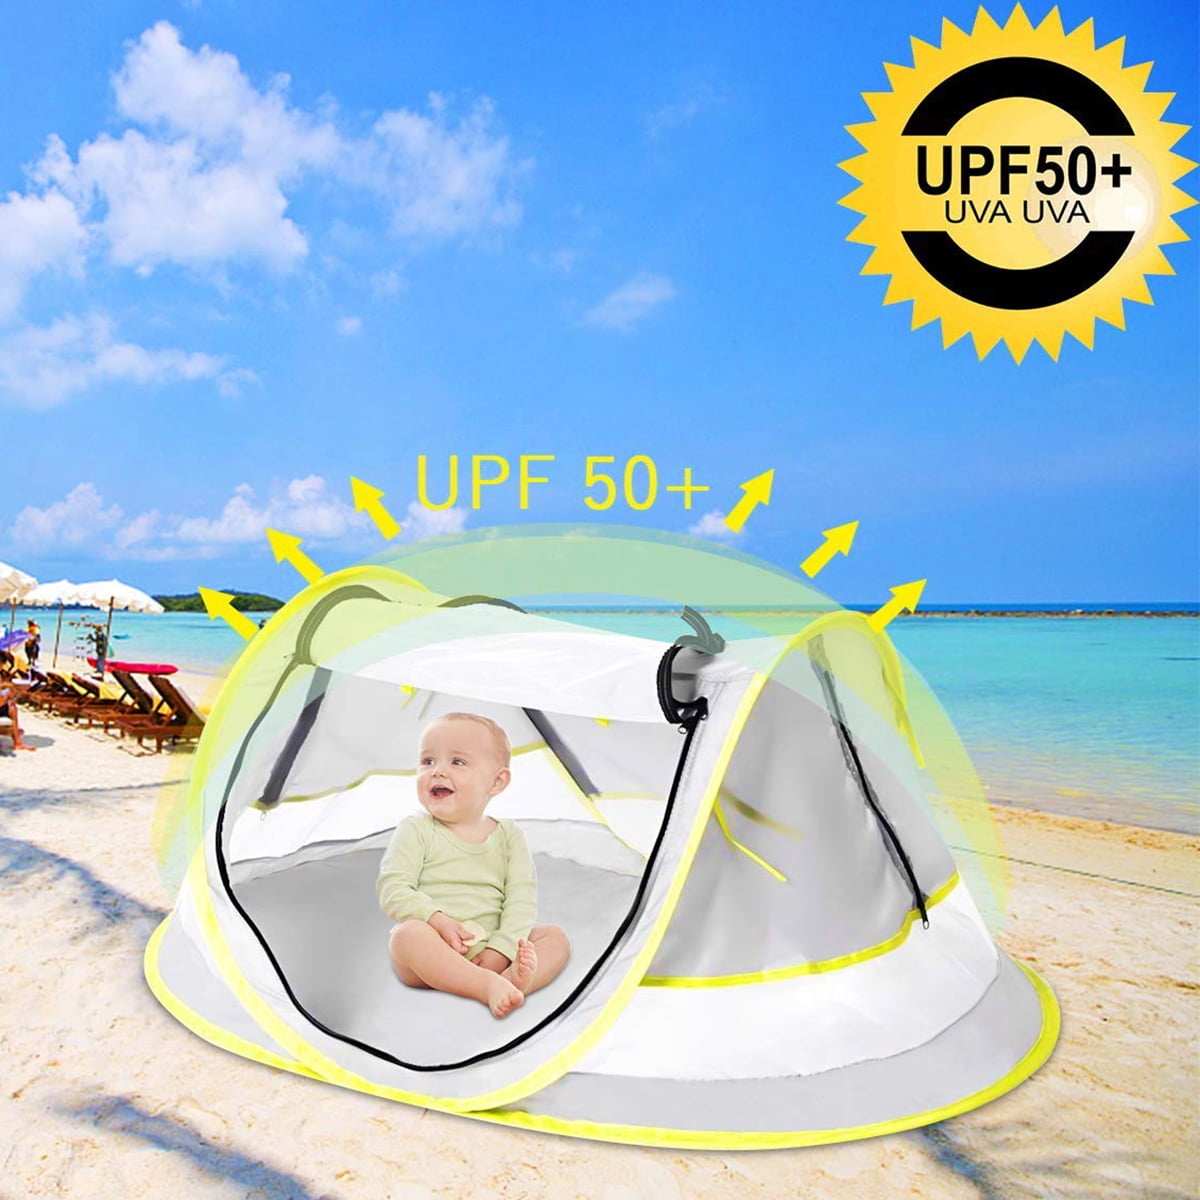 Baby Shade with Mosquito Net Girls Sun Shade Beach Umbrella for Infant NEQUARE Baby Beach Tent,Portable Pop Up Tent UPF 50+ Sun Shelters Boys 